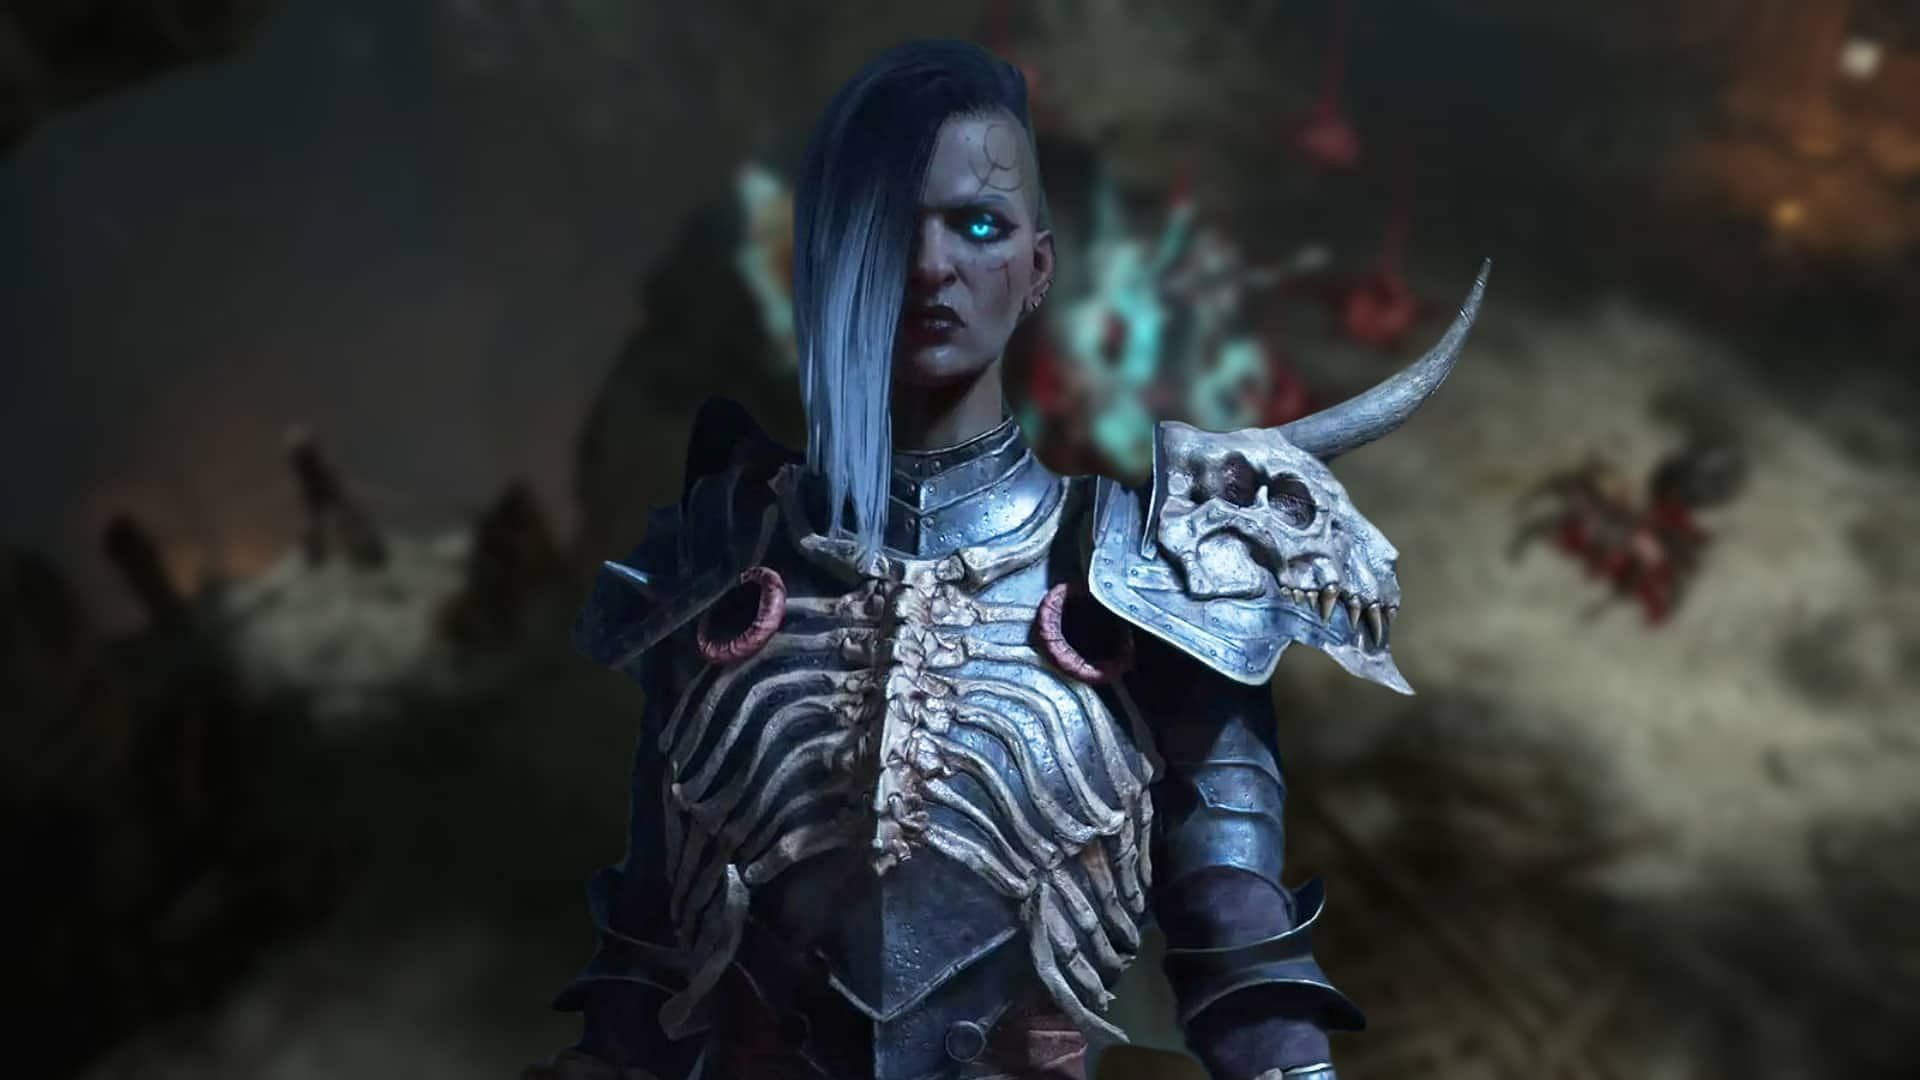 The Necromancer is the only class capable of wielding the Bloodless Scream-Diablo 4 (Image via Blizzard)